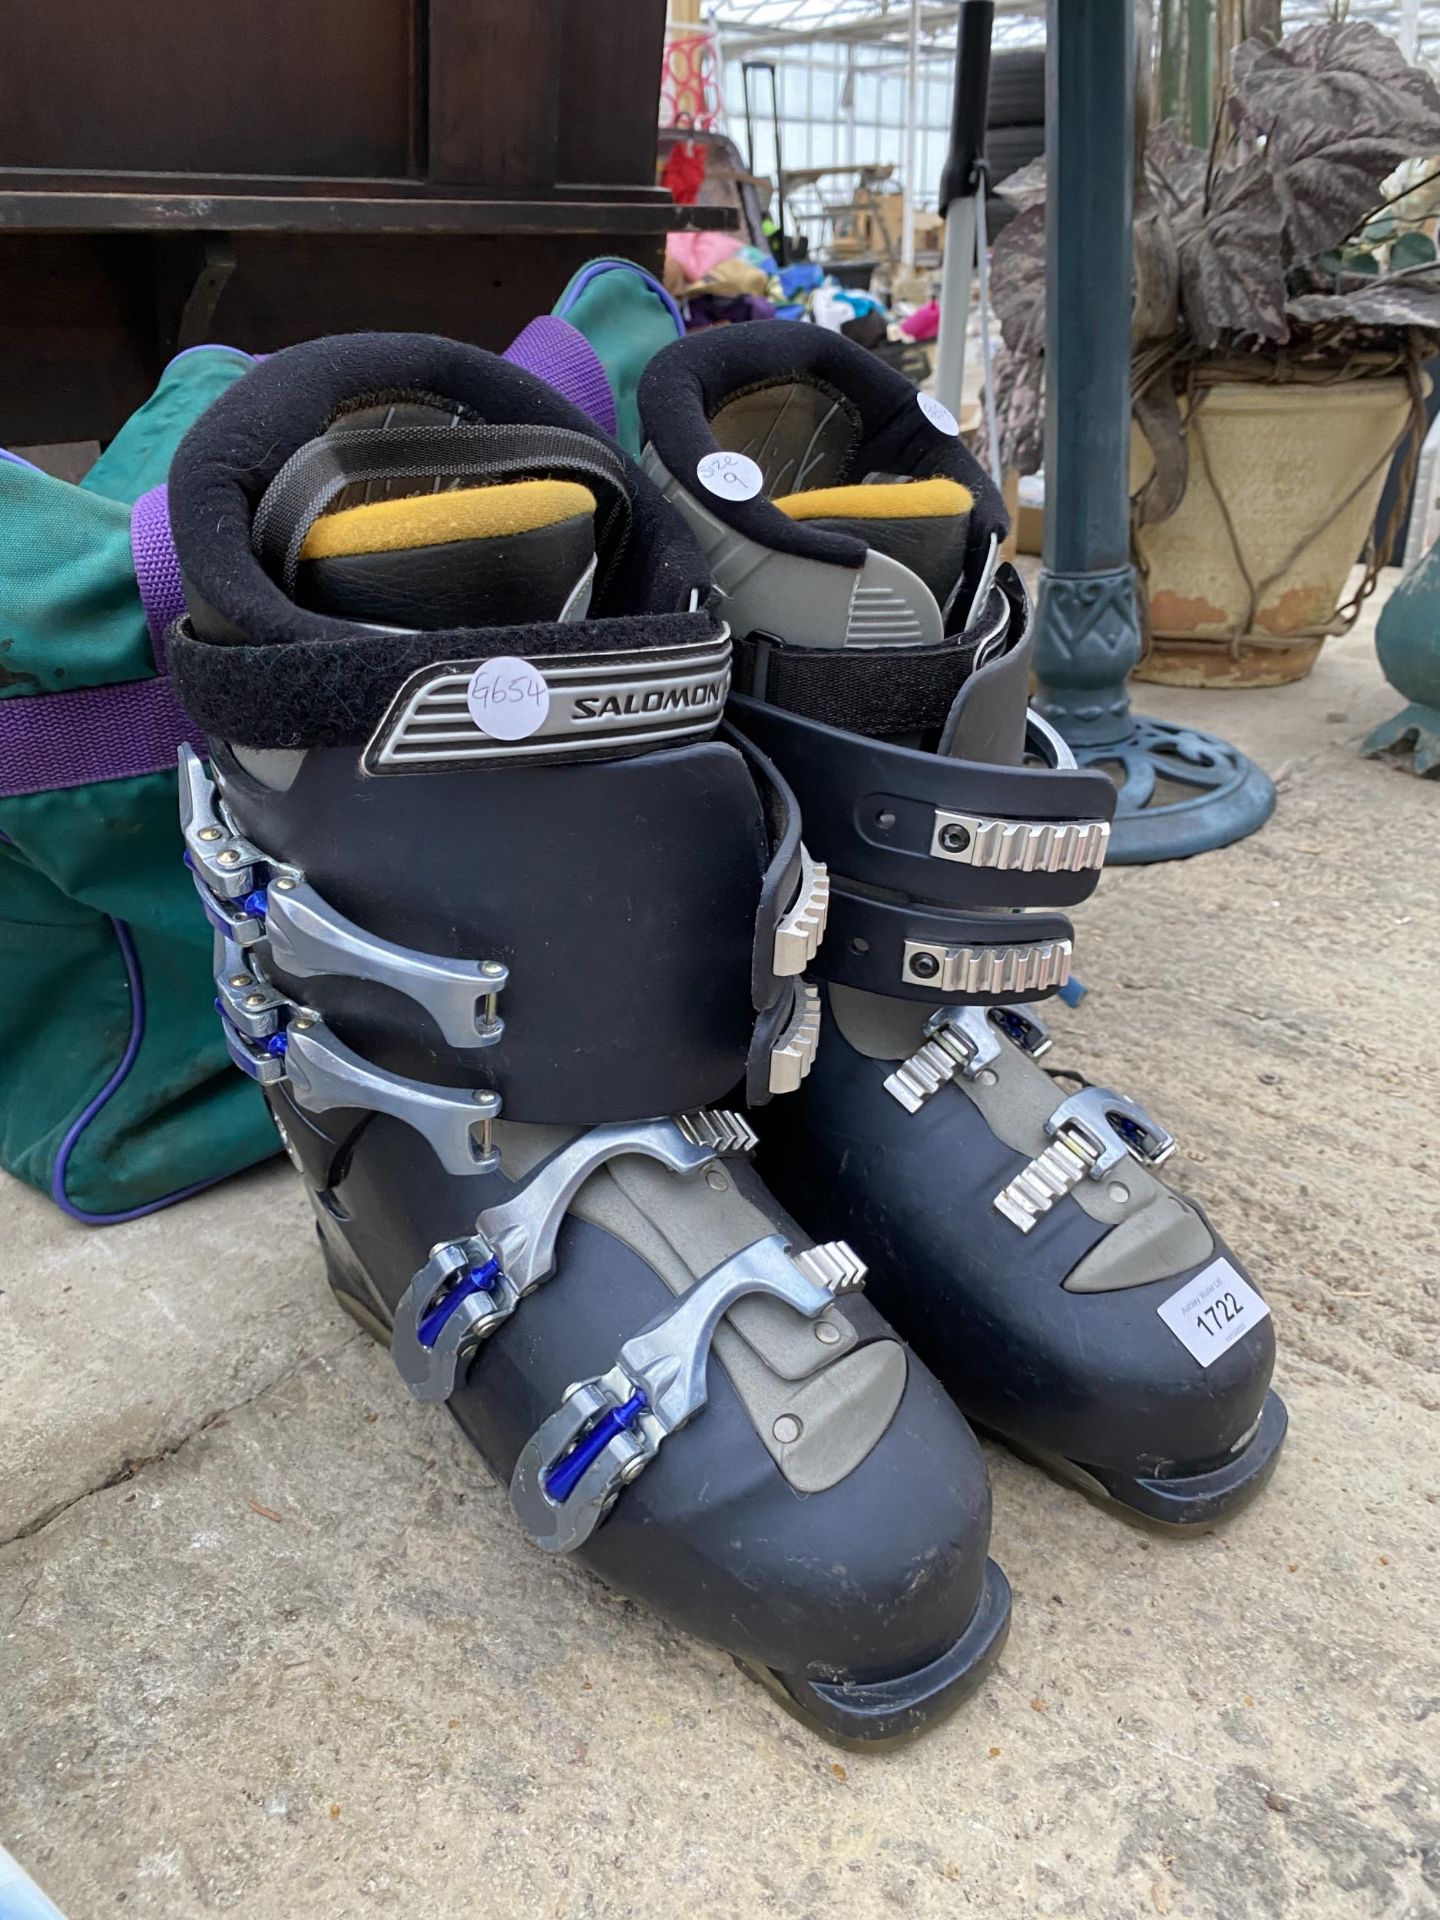 A PAIR OF SKI BOOTS AND A CARRY BAG - Image 2 of 4